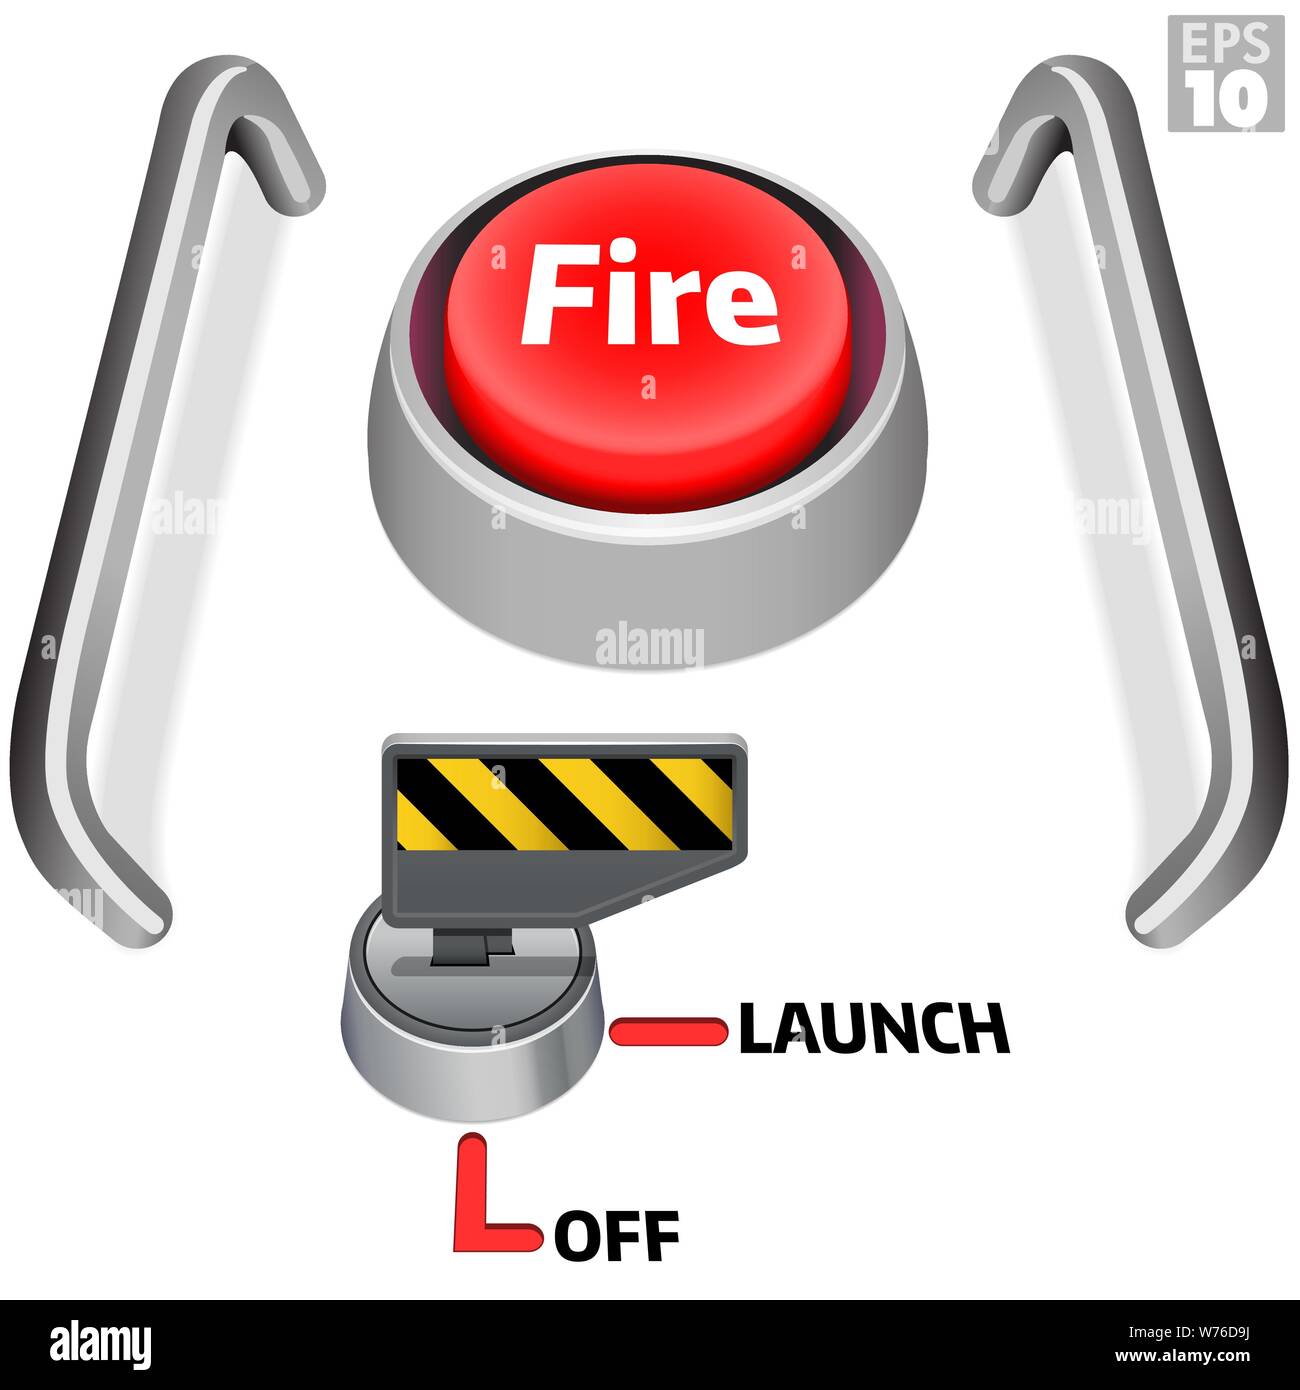 Launch control center with big red push button, security launch key engaged and push button guard for the fire switch. Stock Vector